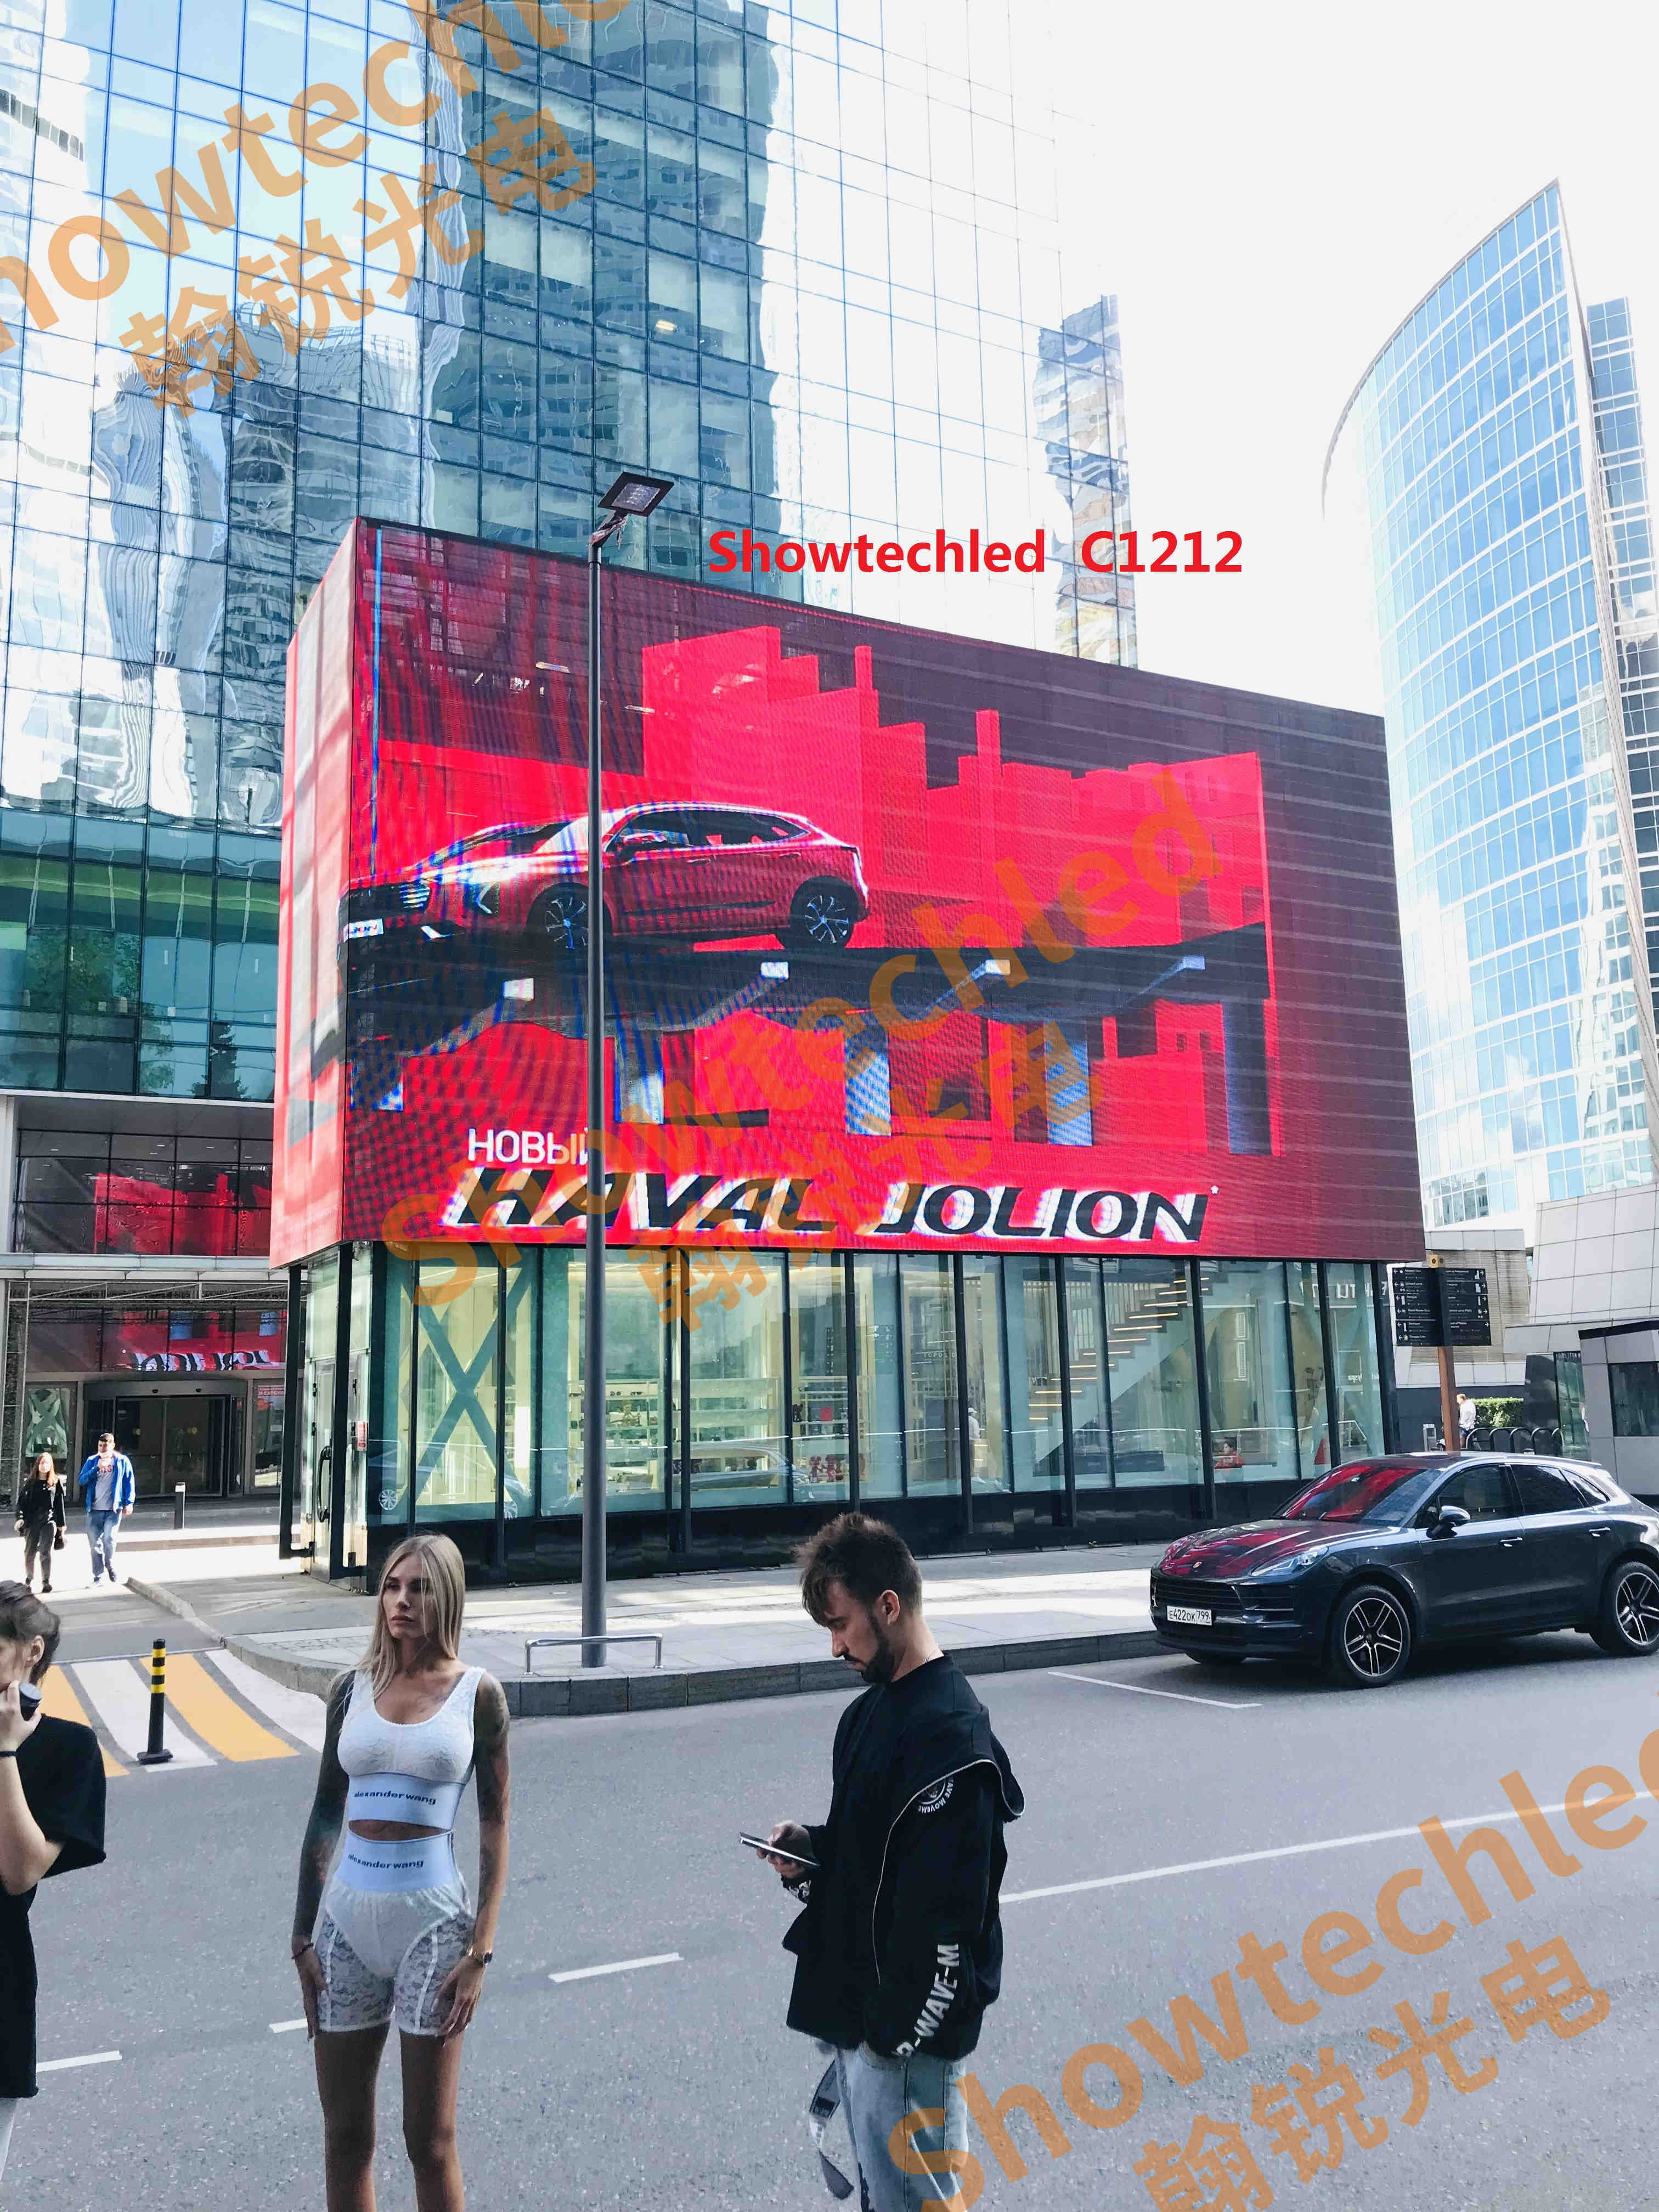 Showtechled outdoor LED Mesh screen instantly ignites your visual impact! " Exclusive for outdoor advertising "